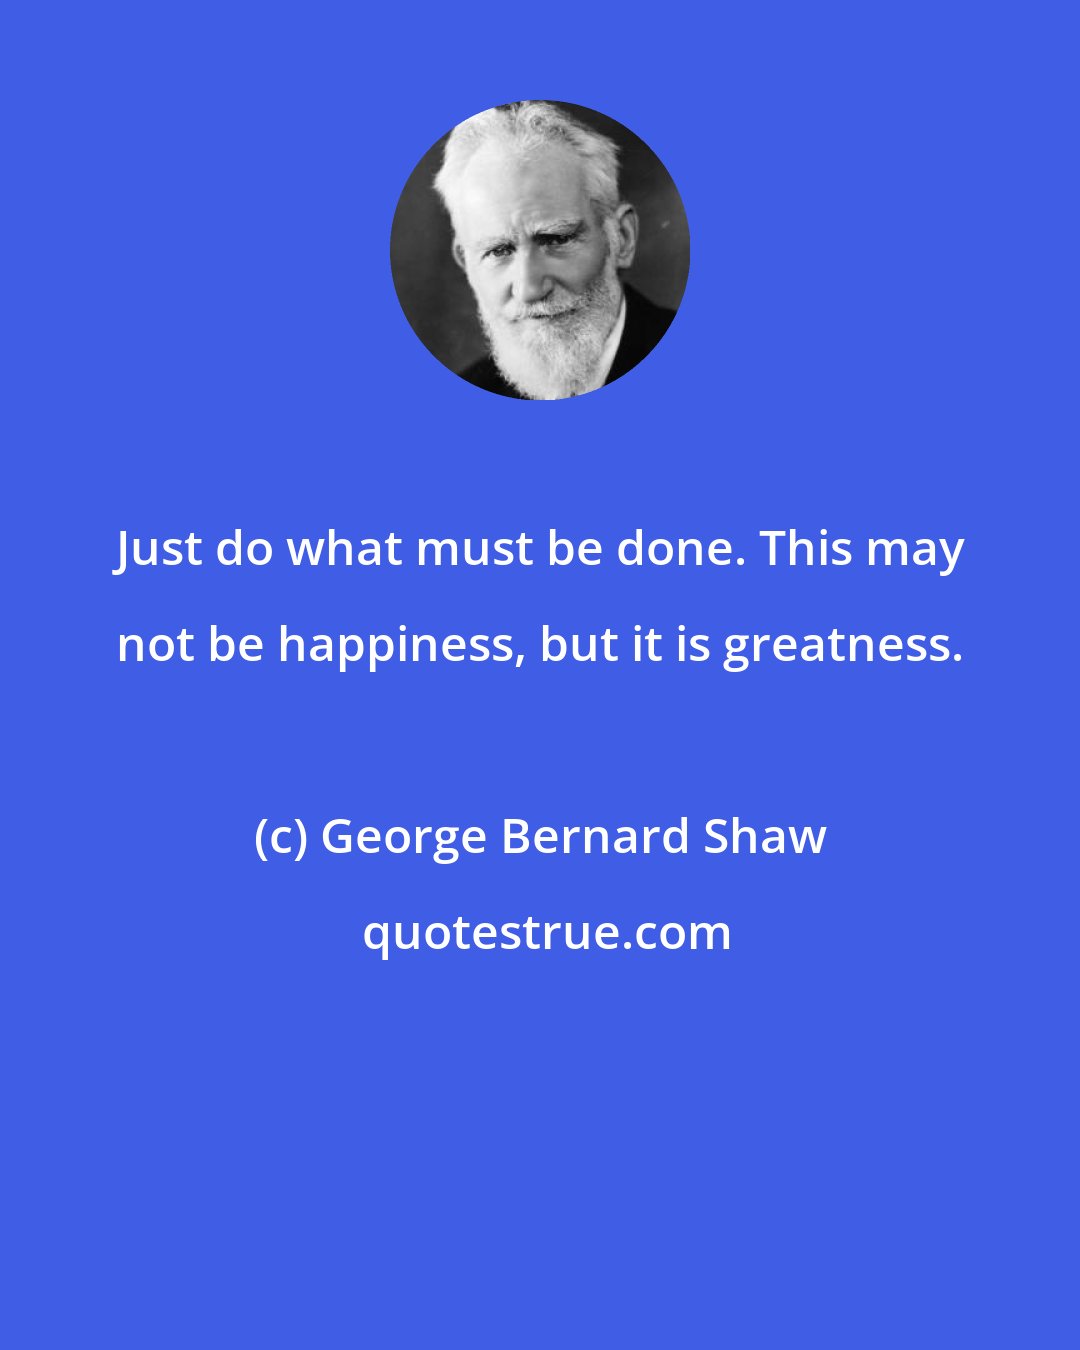 George Bernard Shaw: Just do what must be done. This may not be happiness, but it is greatness.